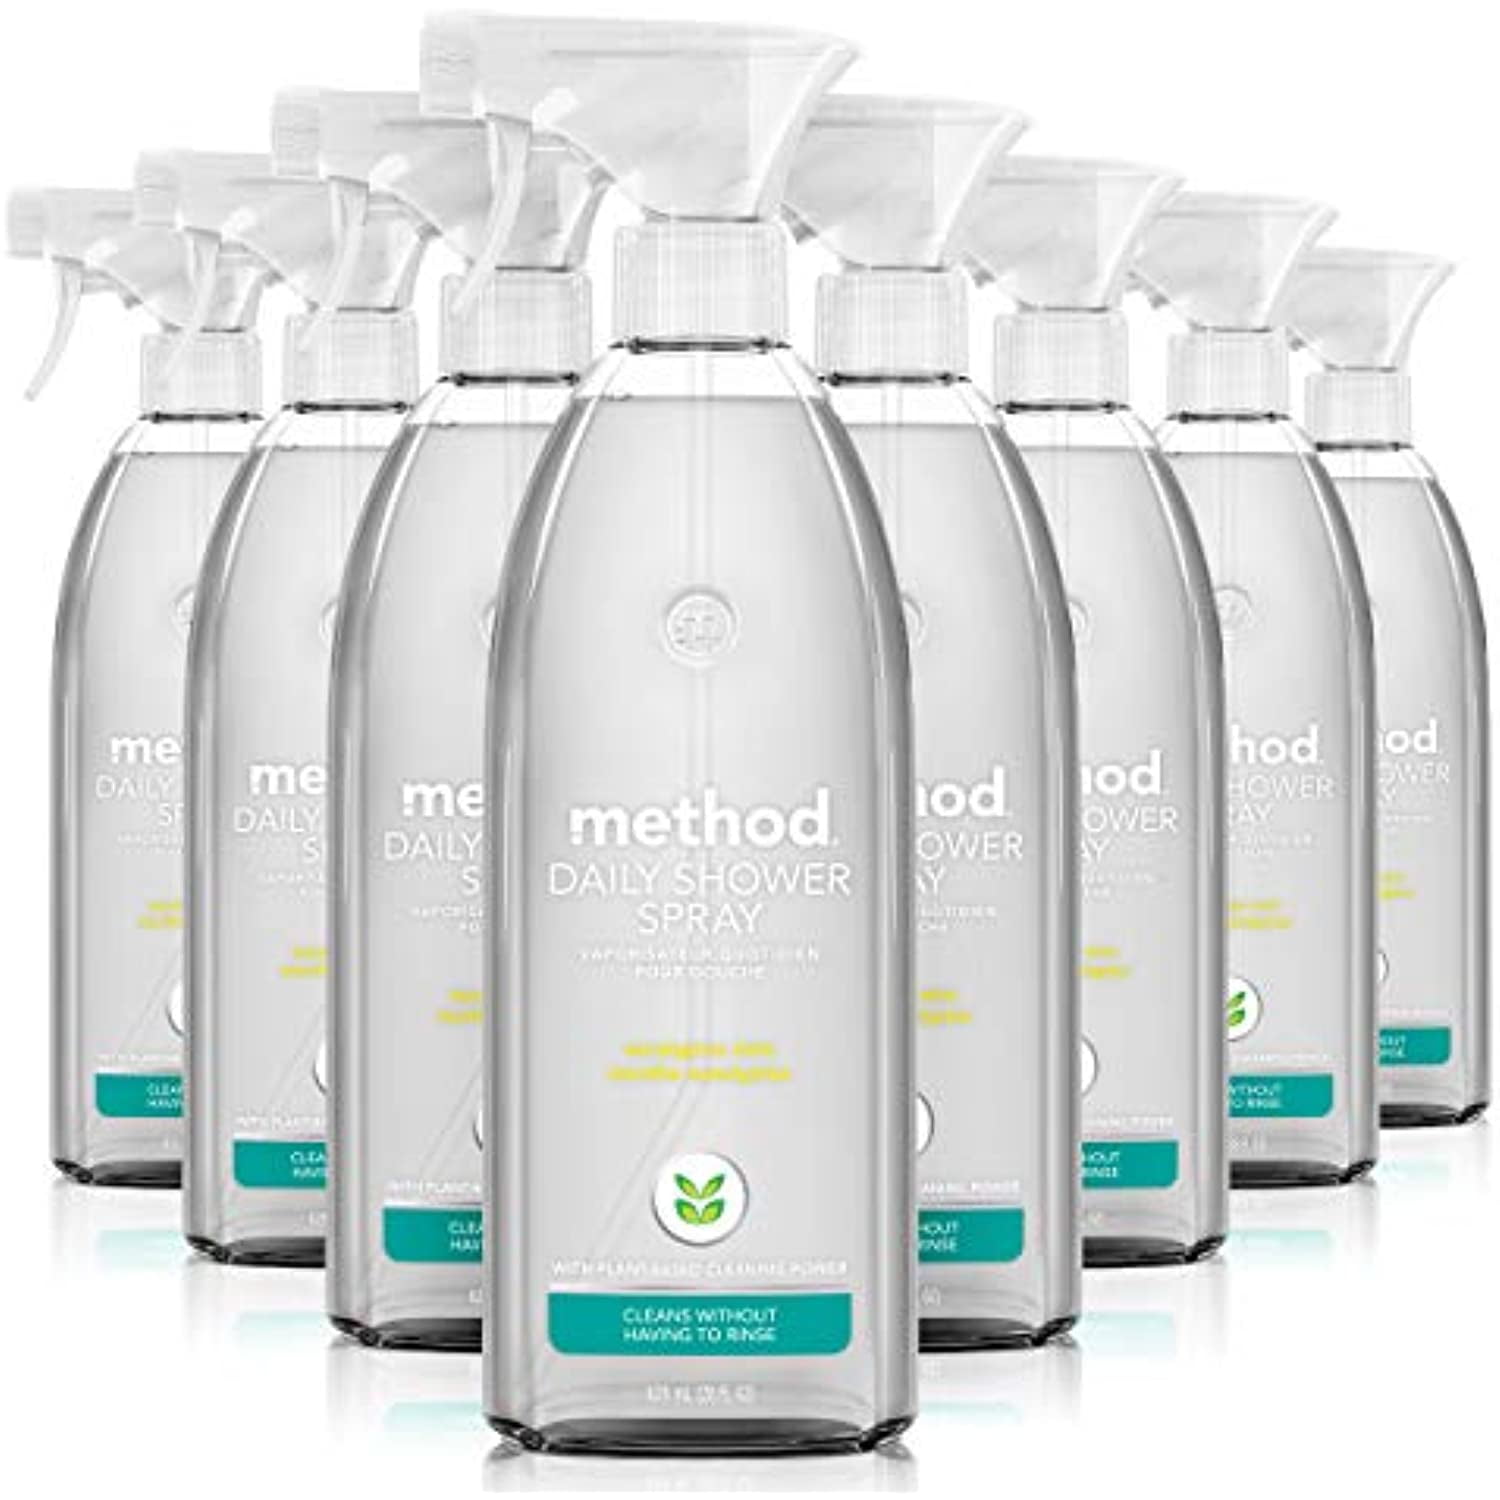 Eucalyptus Mint Daily Shower Spray Refill at Whole Foods Market